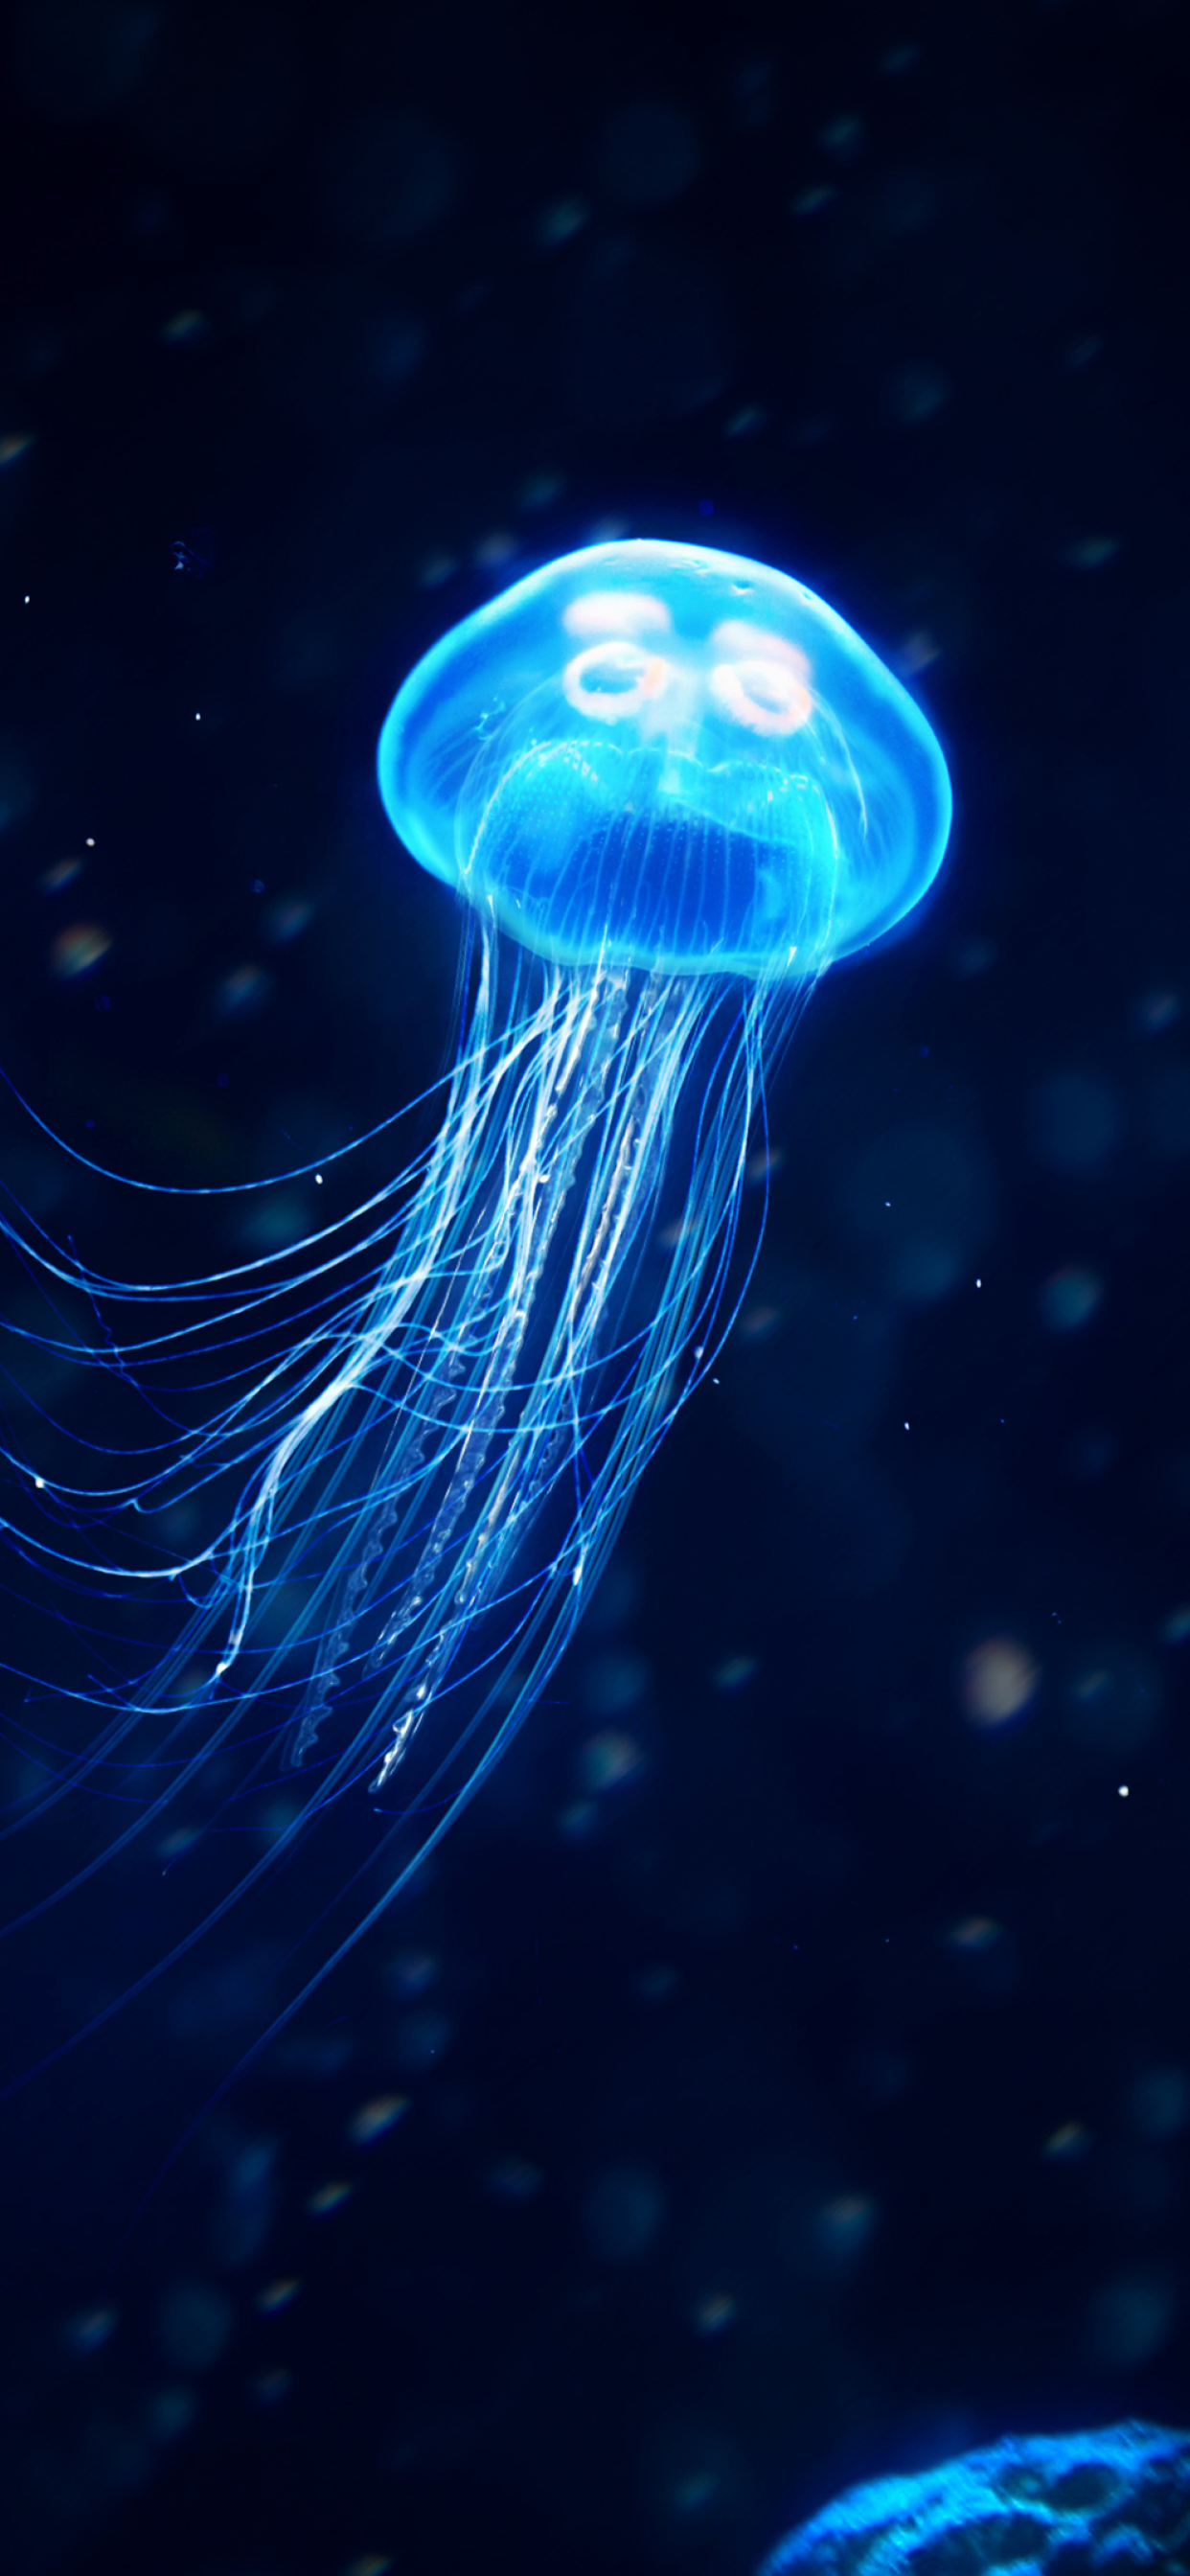 Glowing Jellyfish Wallpapers 52 images inside